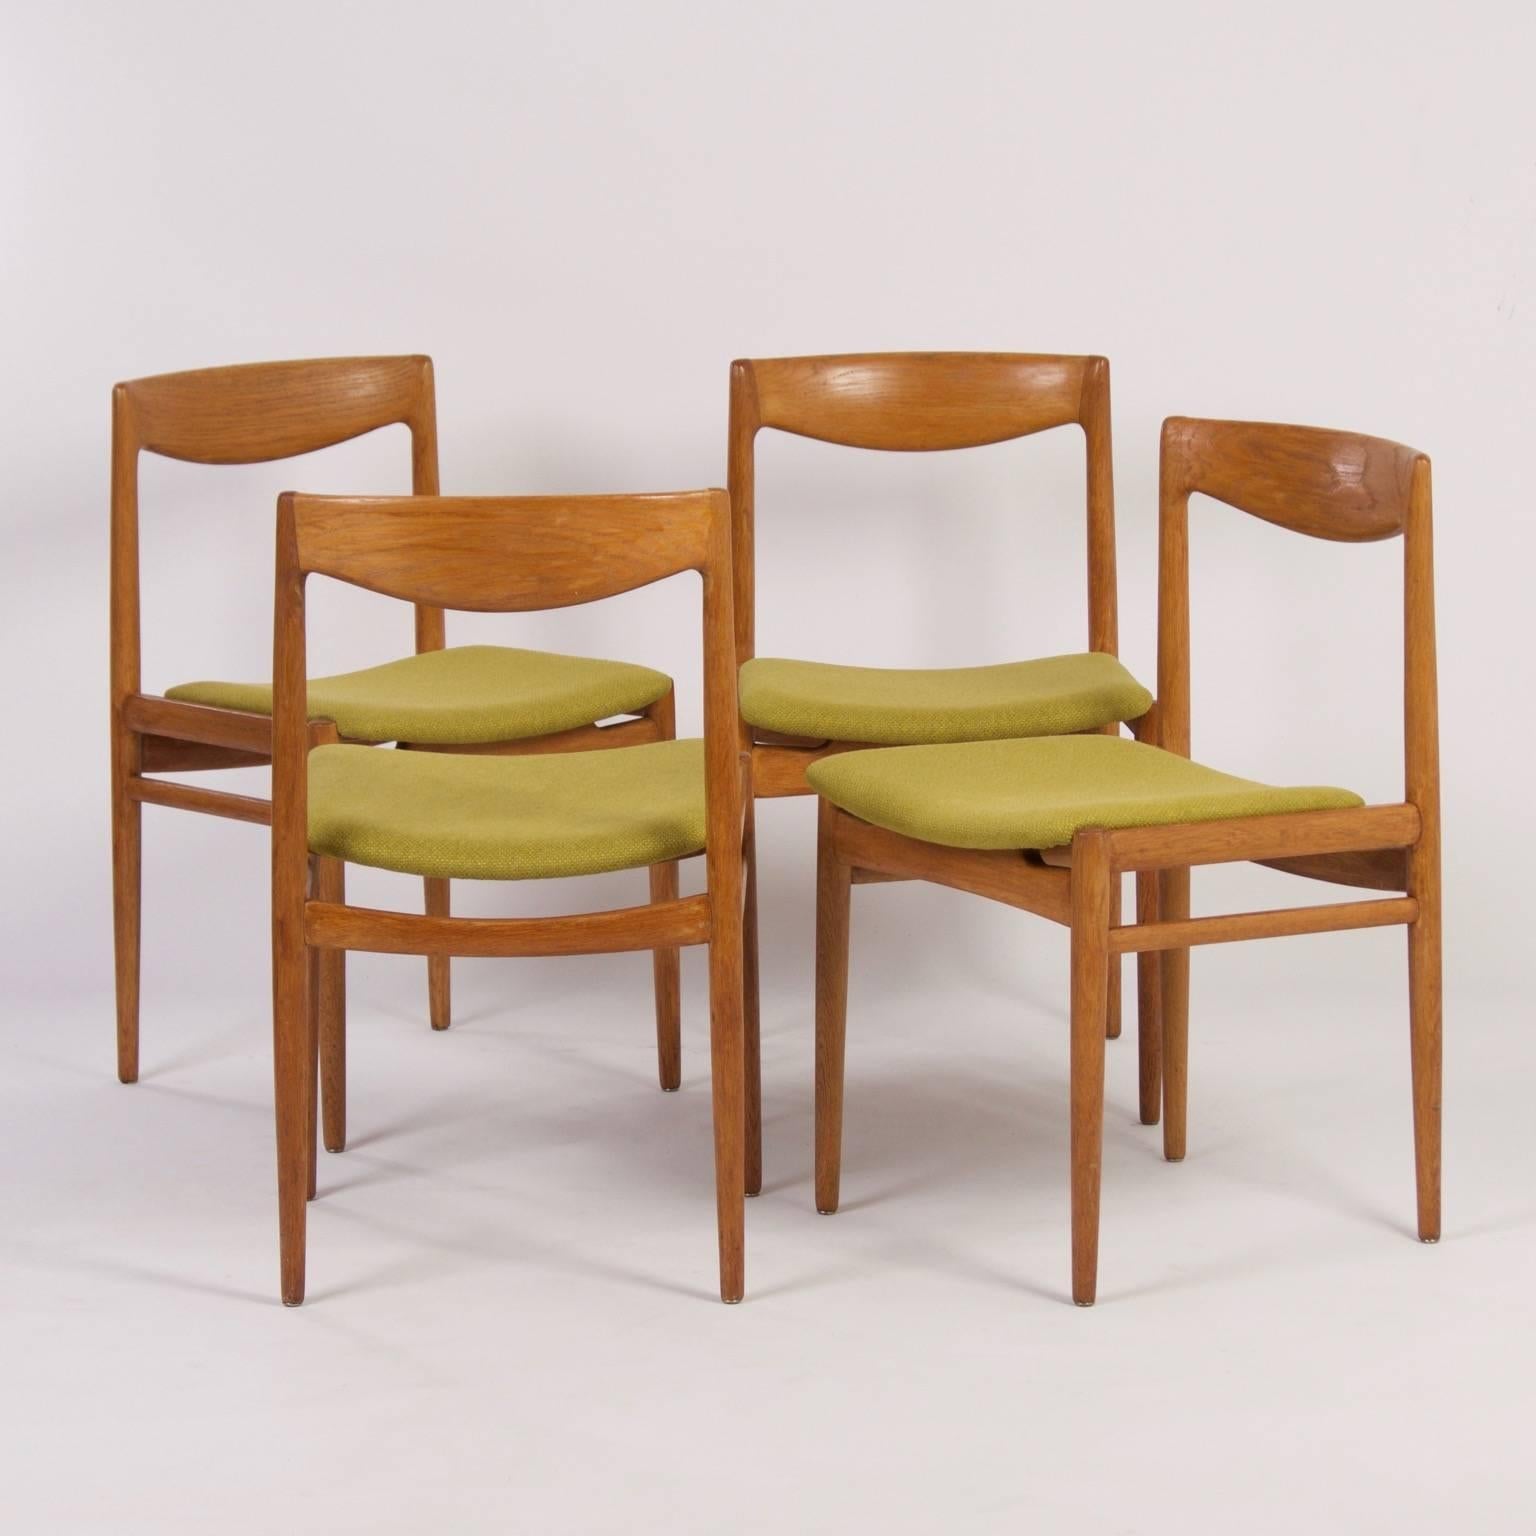 Green Danish dining chairs in the style of Møller from the 1960s. These chairs have been re-uphostered and have a frame of light oak. Given the age of these chairs are still in very good condition, normal traces of use. The chairs have been